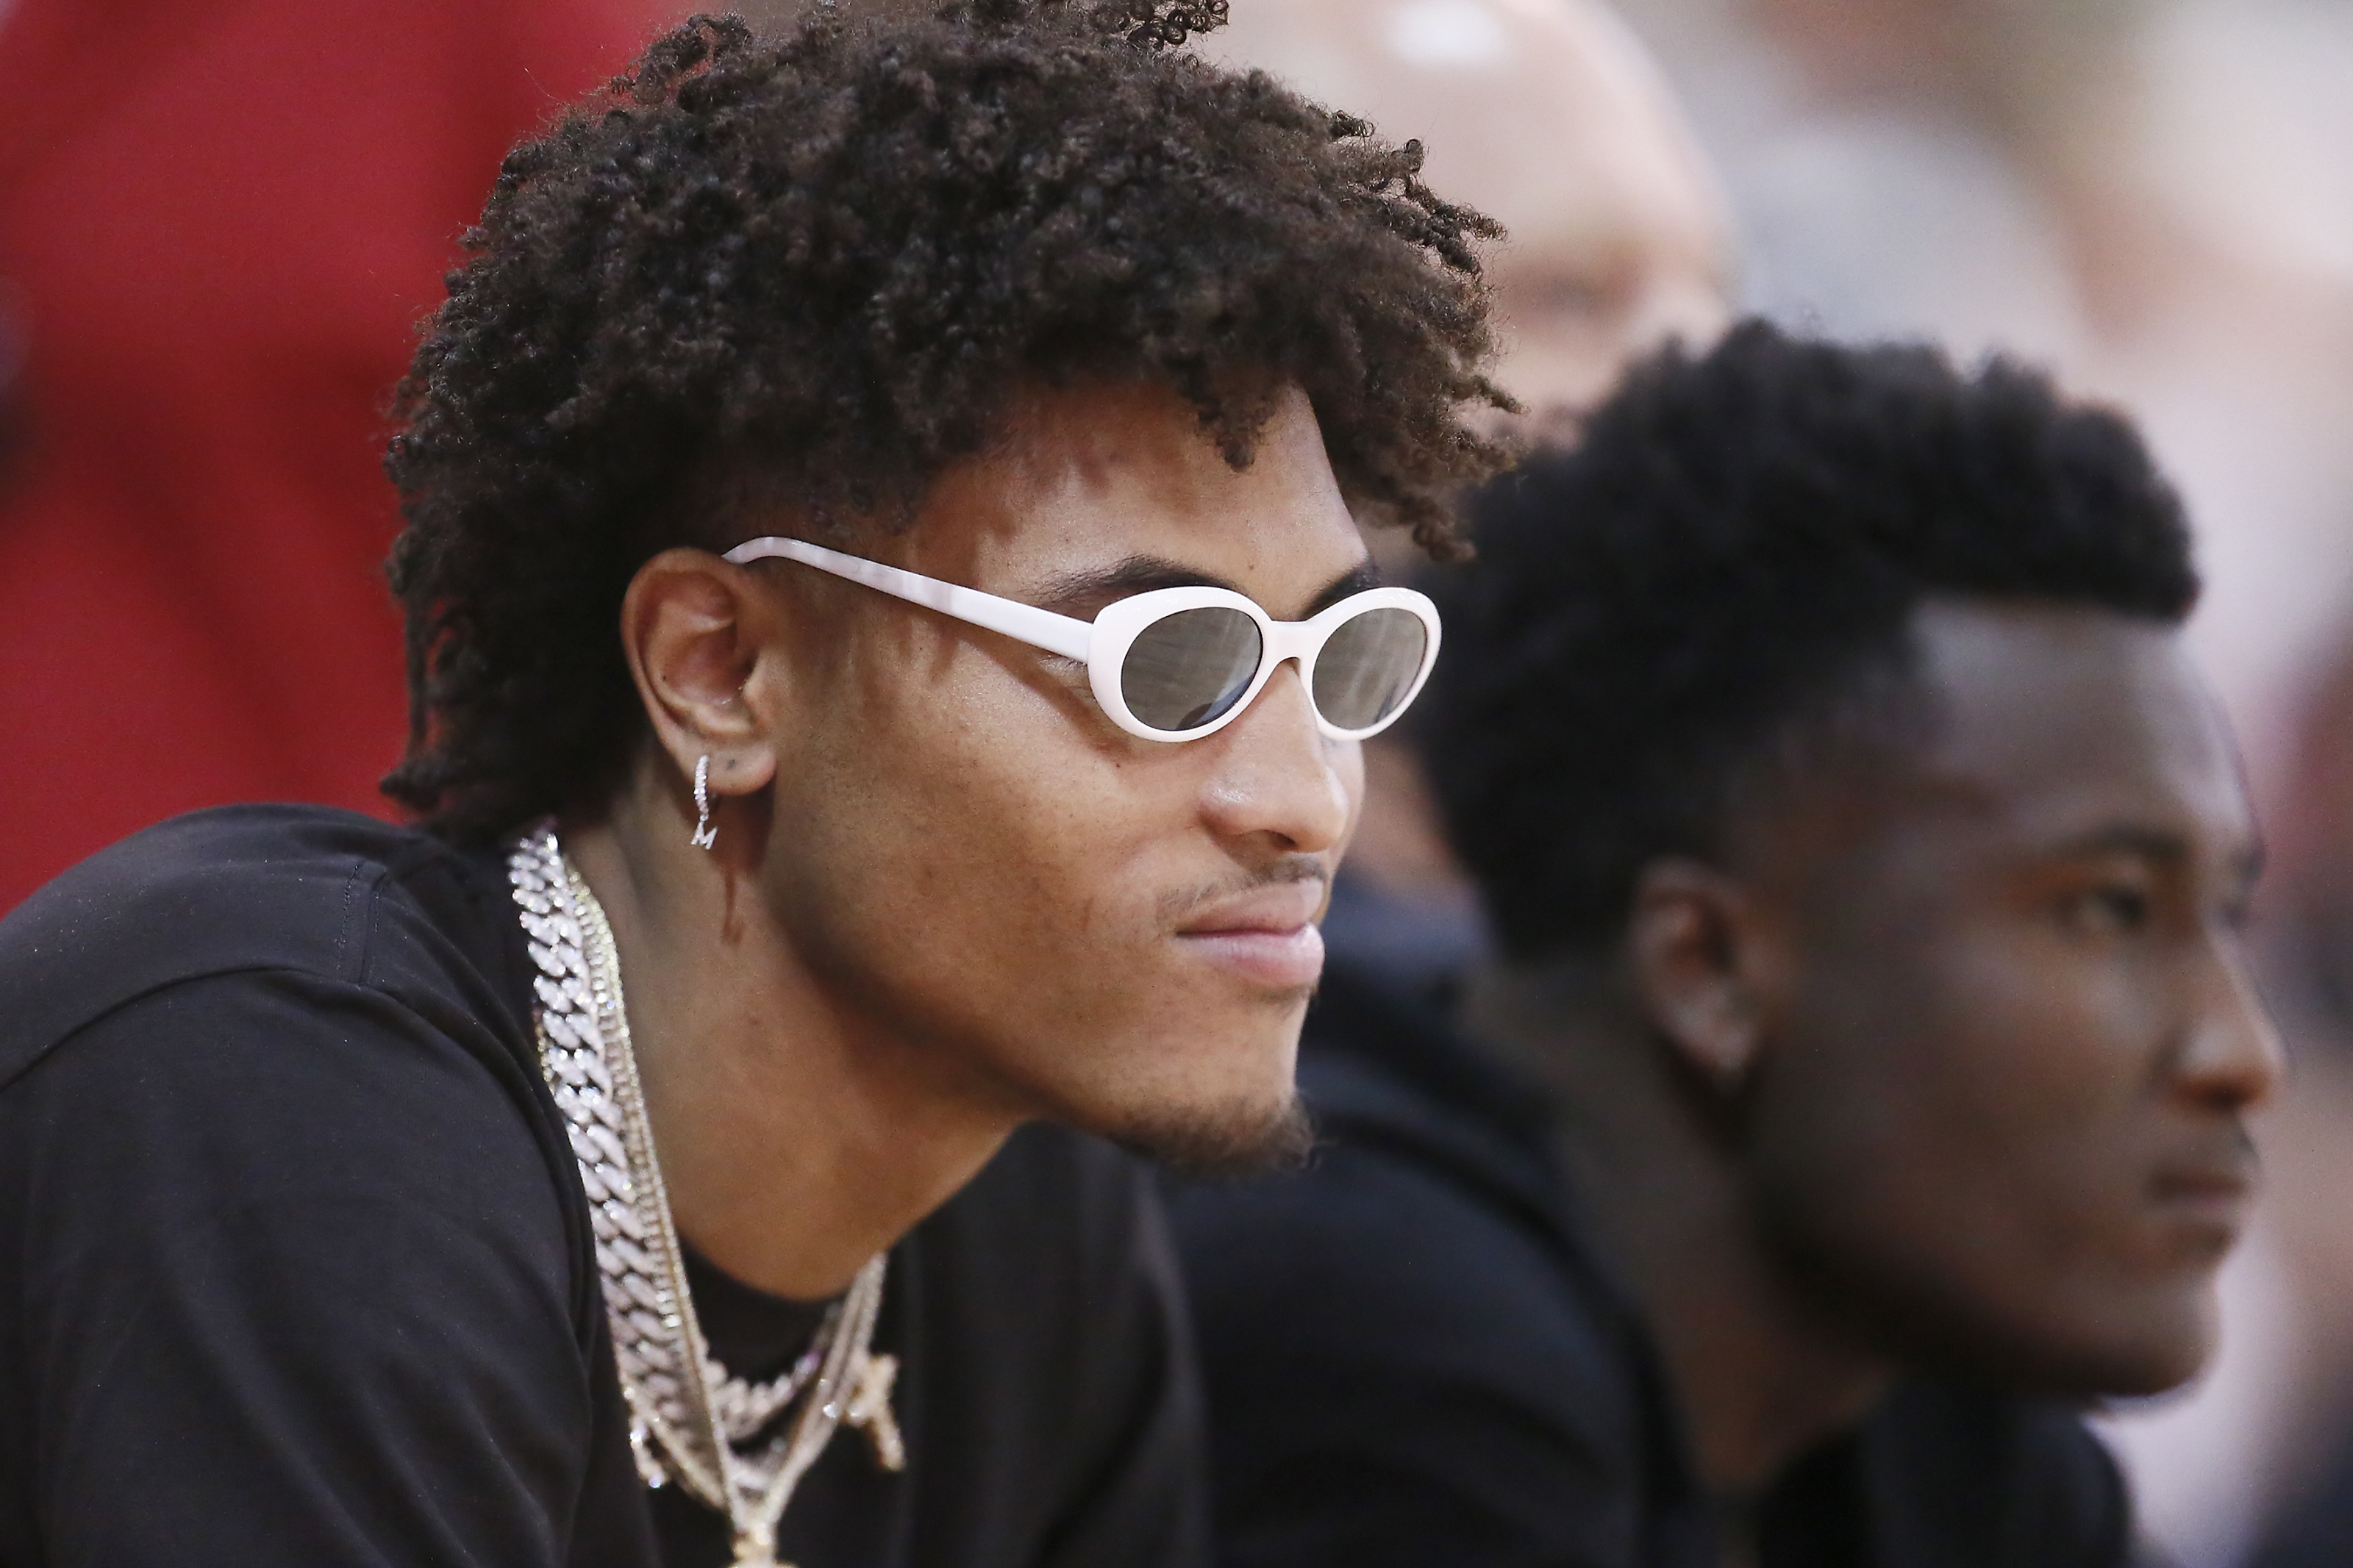 Kelly Oubre Jr.'s style blends well with Phoenix Suns in his debut